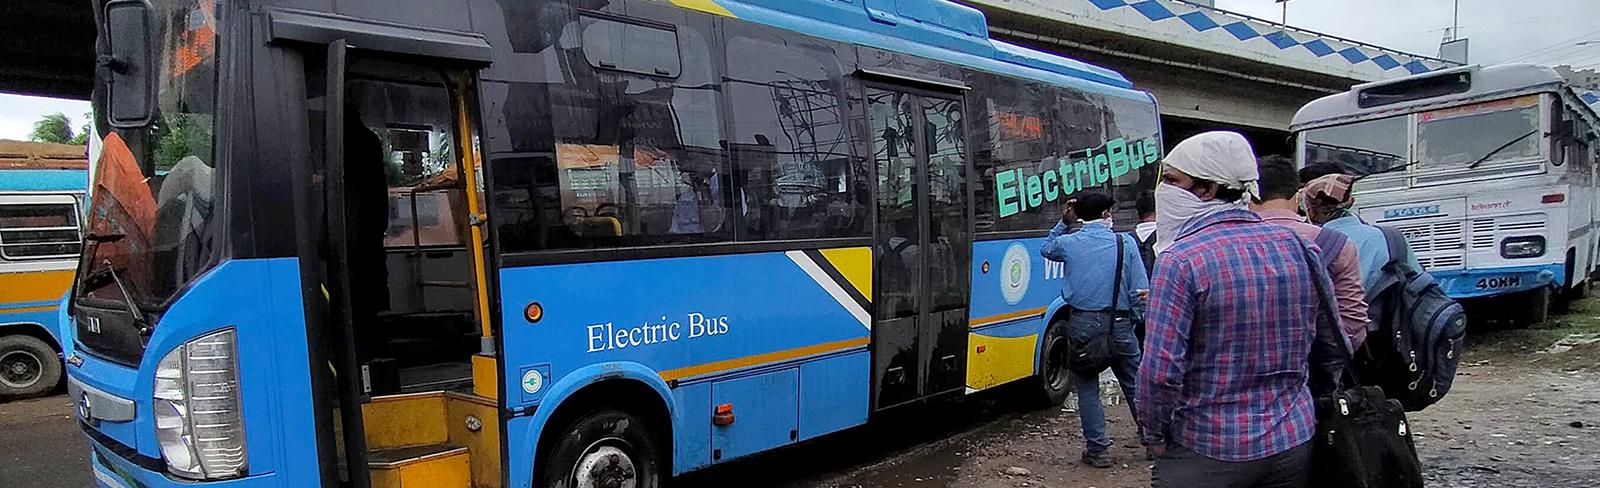 India - Transition to Electric Vehicles Puts Kolkata on the Road to Clean Transport